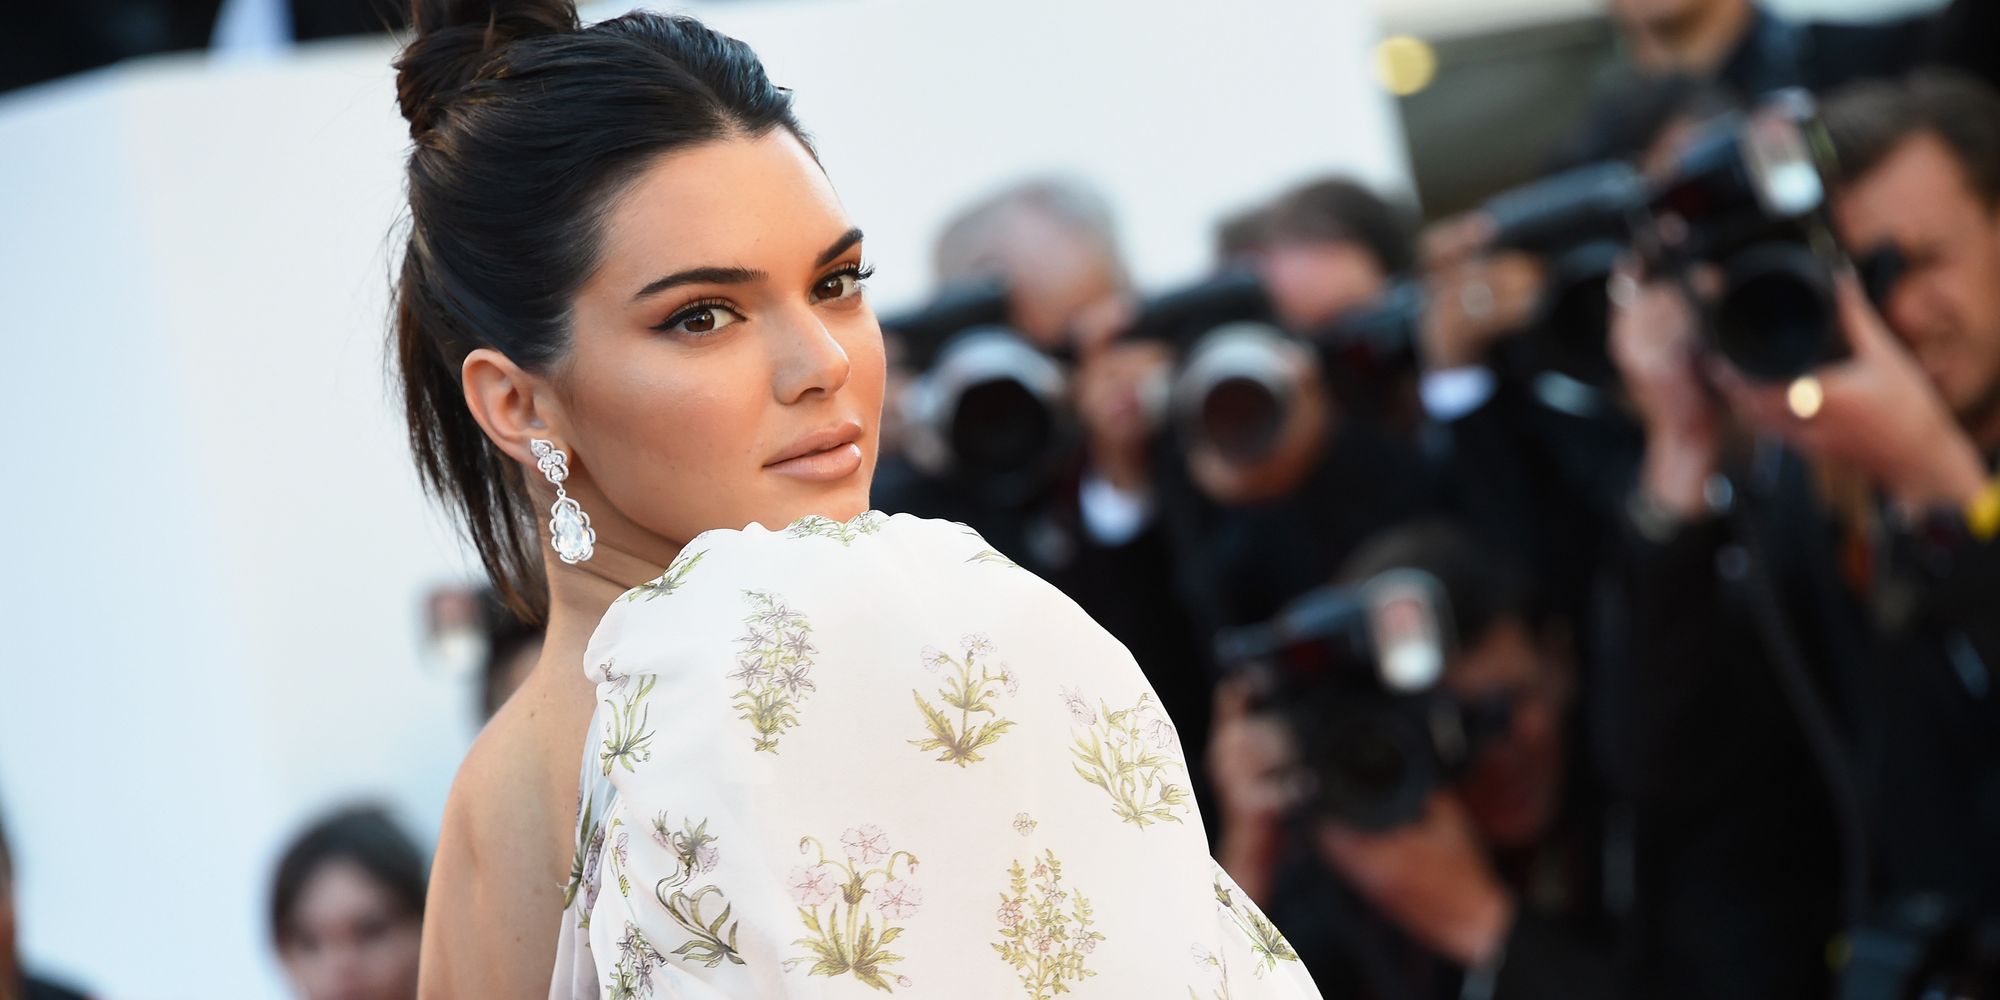 Socks With Sandals: Kendall Jenner And The Instagram-Worthy Trend ...